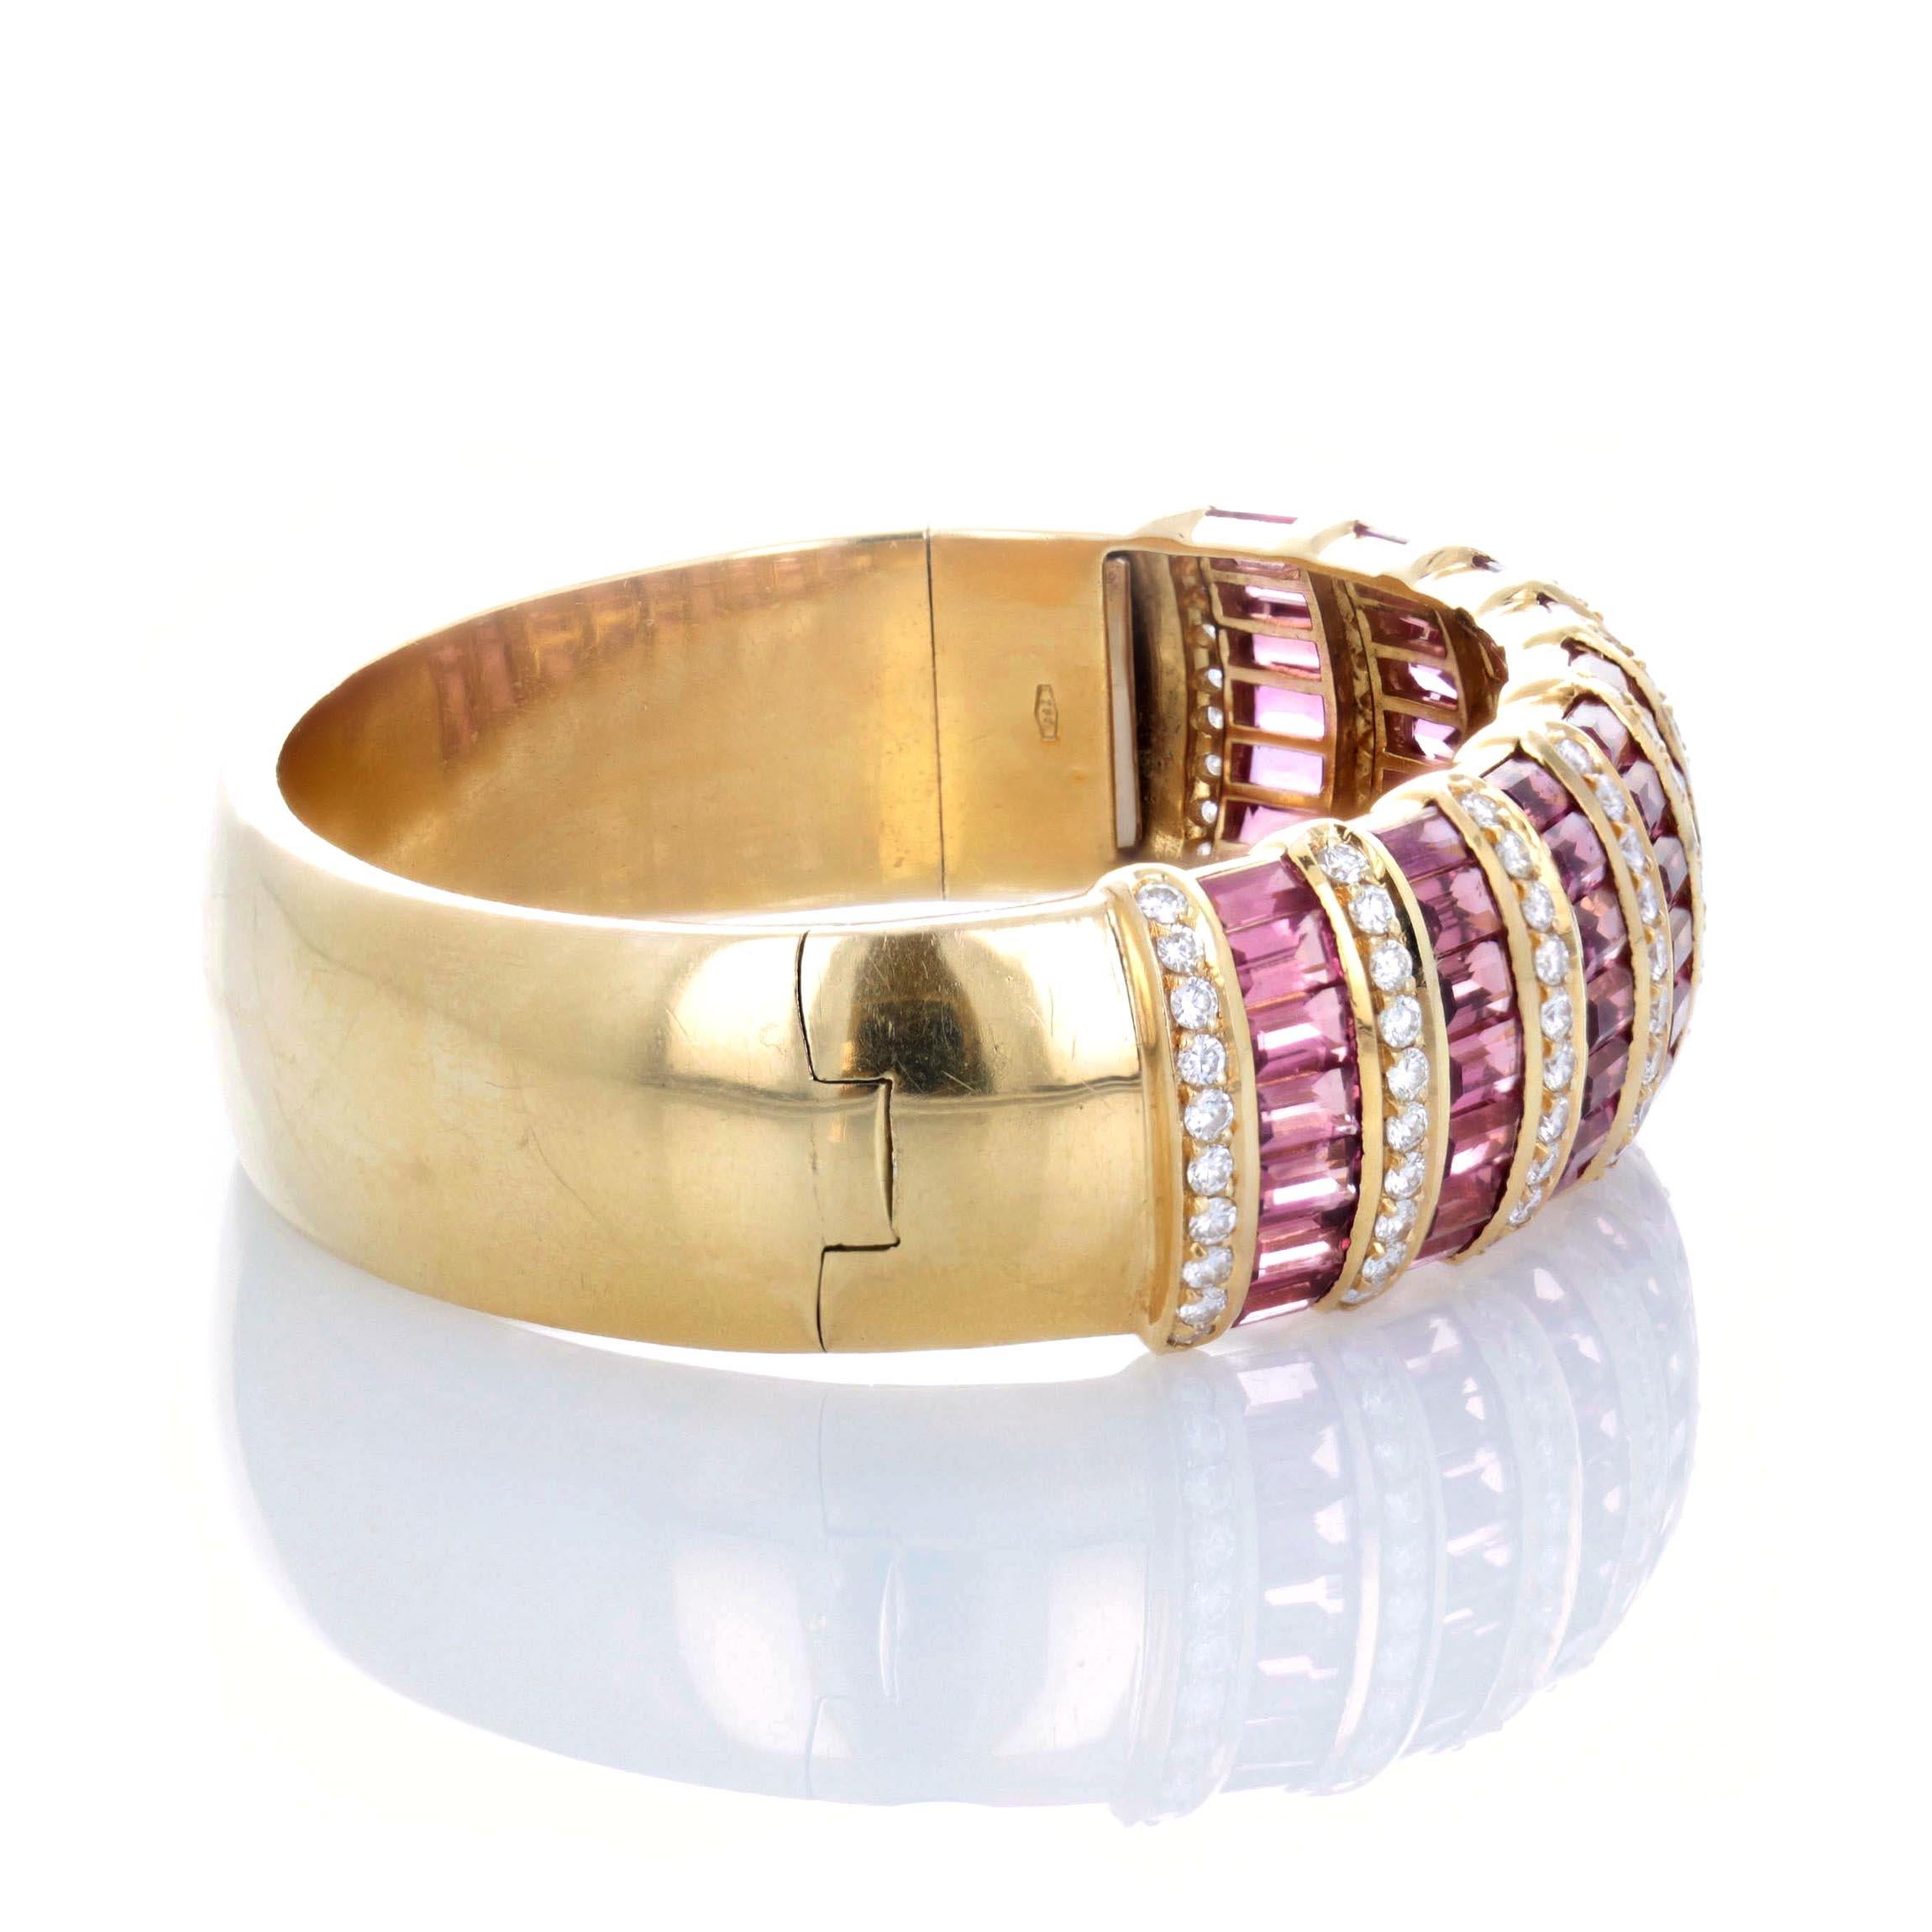 Set with 100 brilliant-cut diamonds weighing 3.26 carats in total and 63 baguette-cut pink tourmalines weighing 20.90 carats. Mounted in 18K yellow gold. Signed. Circa late 1980's.

* More photos by request
* FREE shipping within the continental